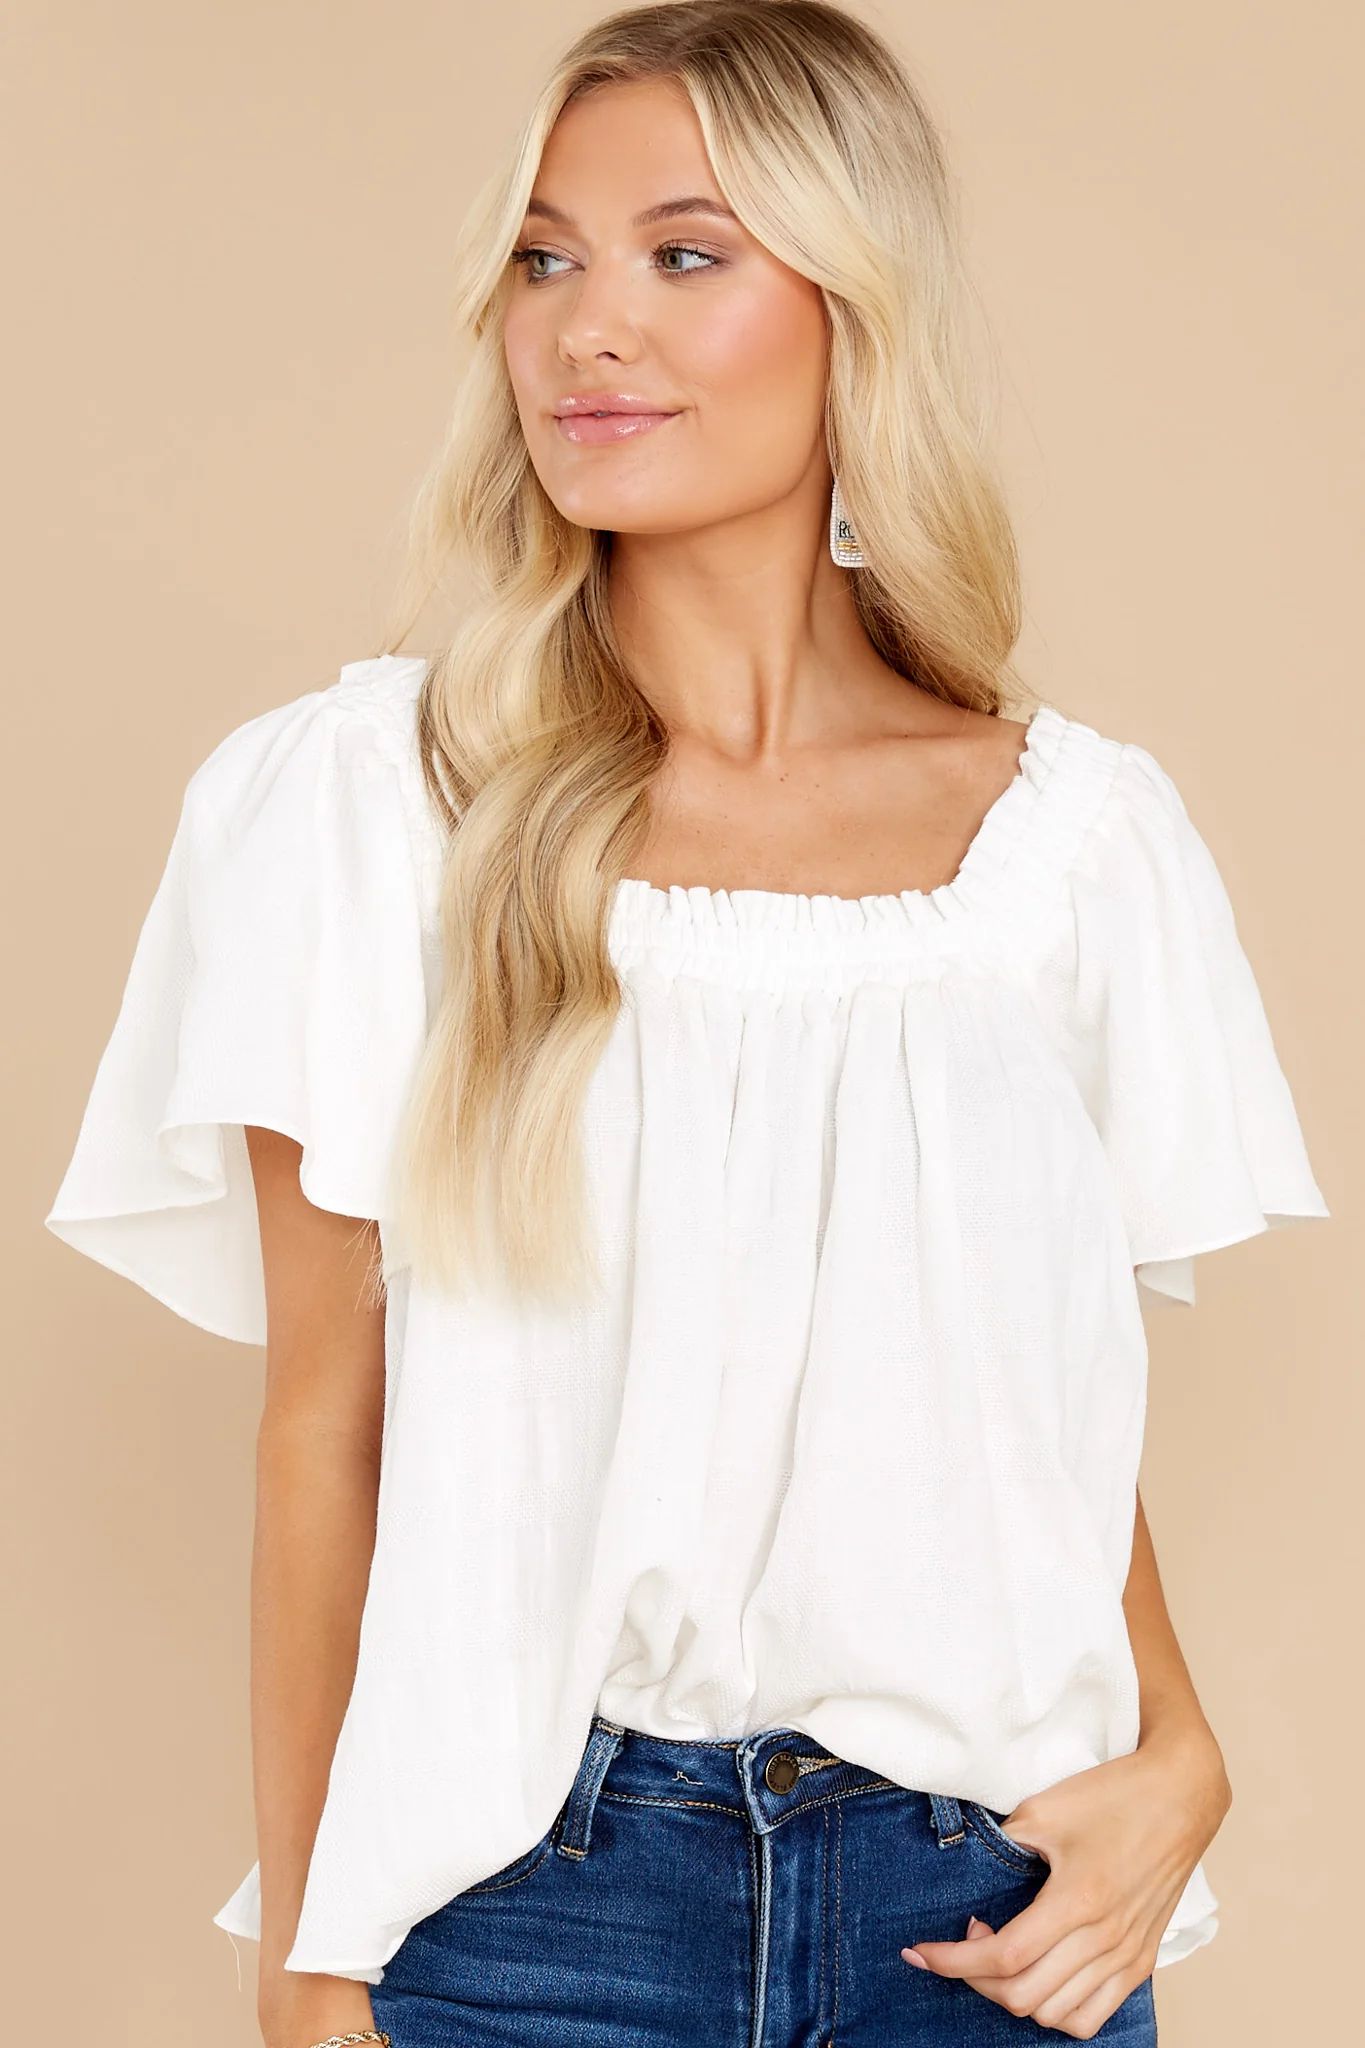 Flirty Expectations White Top | Red Dress 